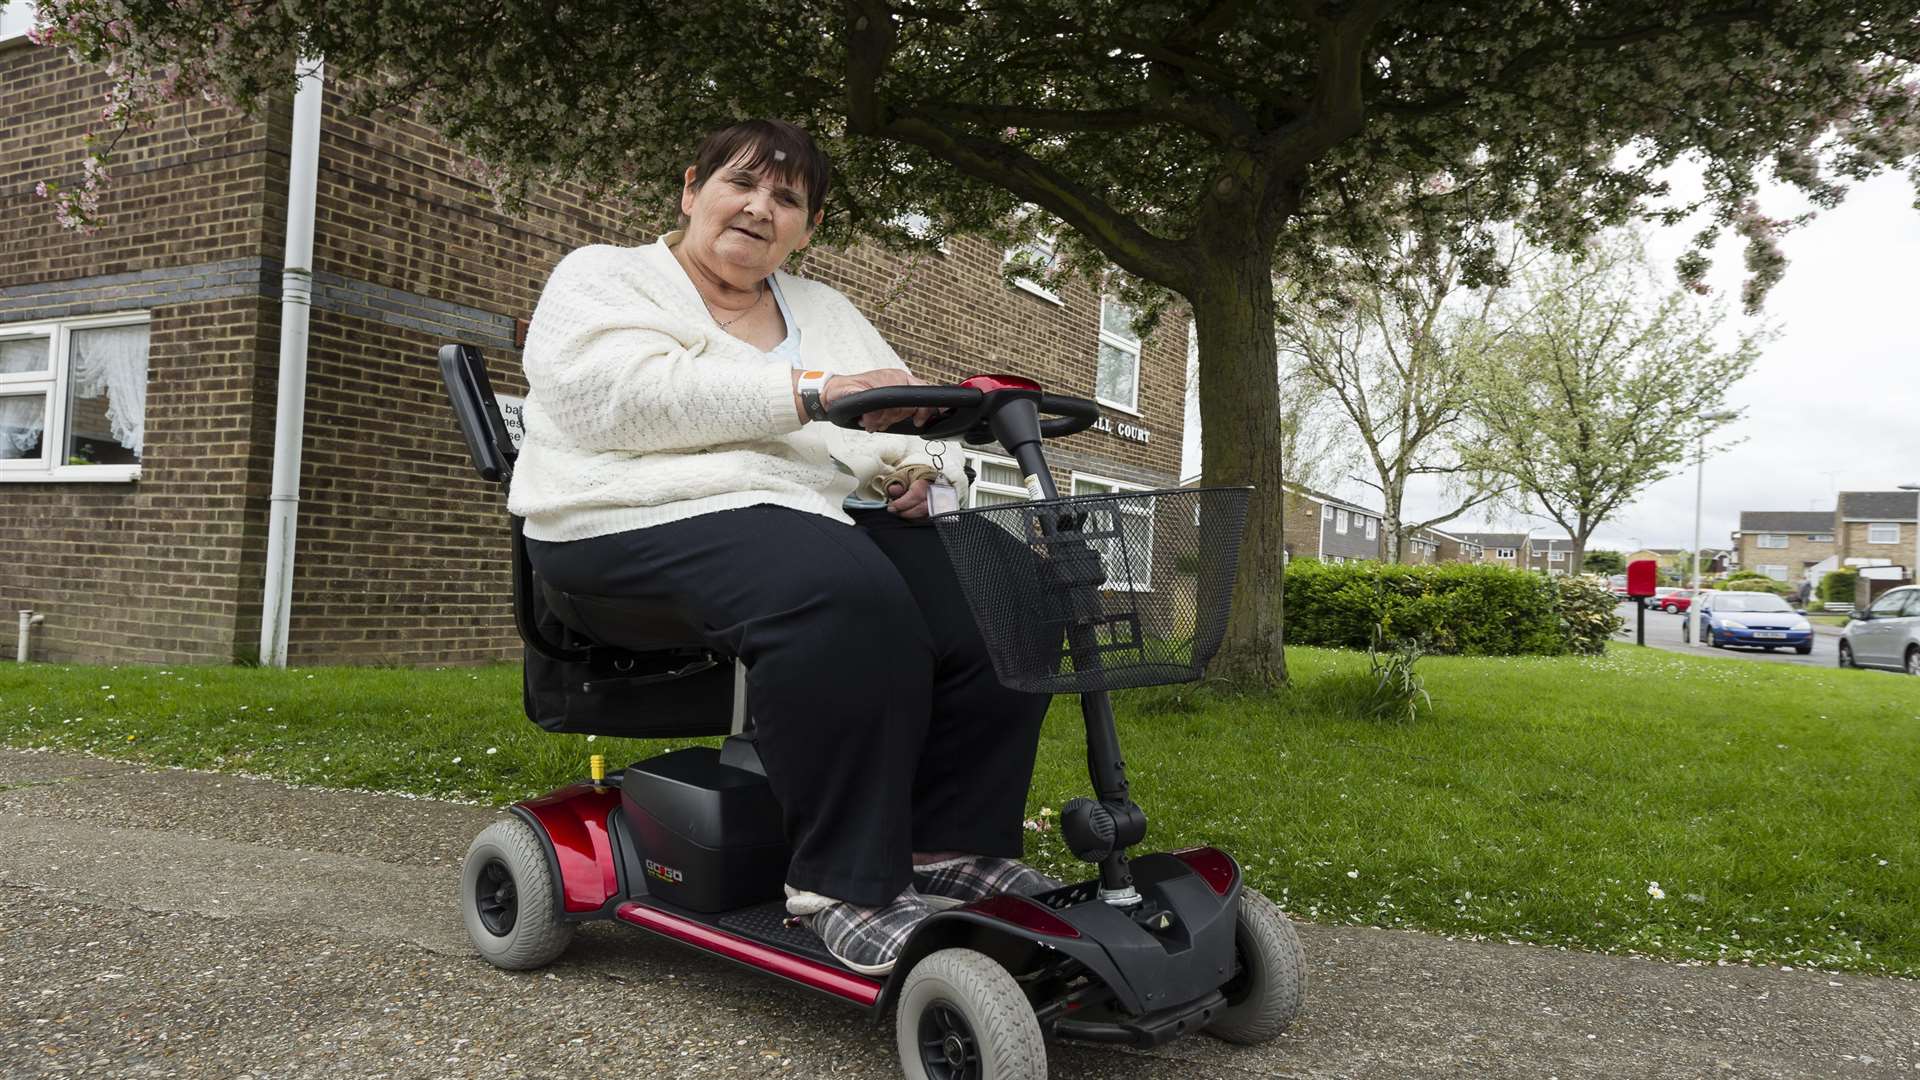 Carol Nunn on the mobility scooter which broke down